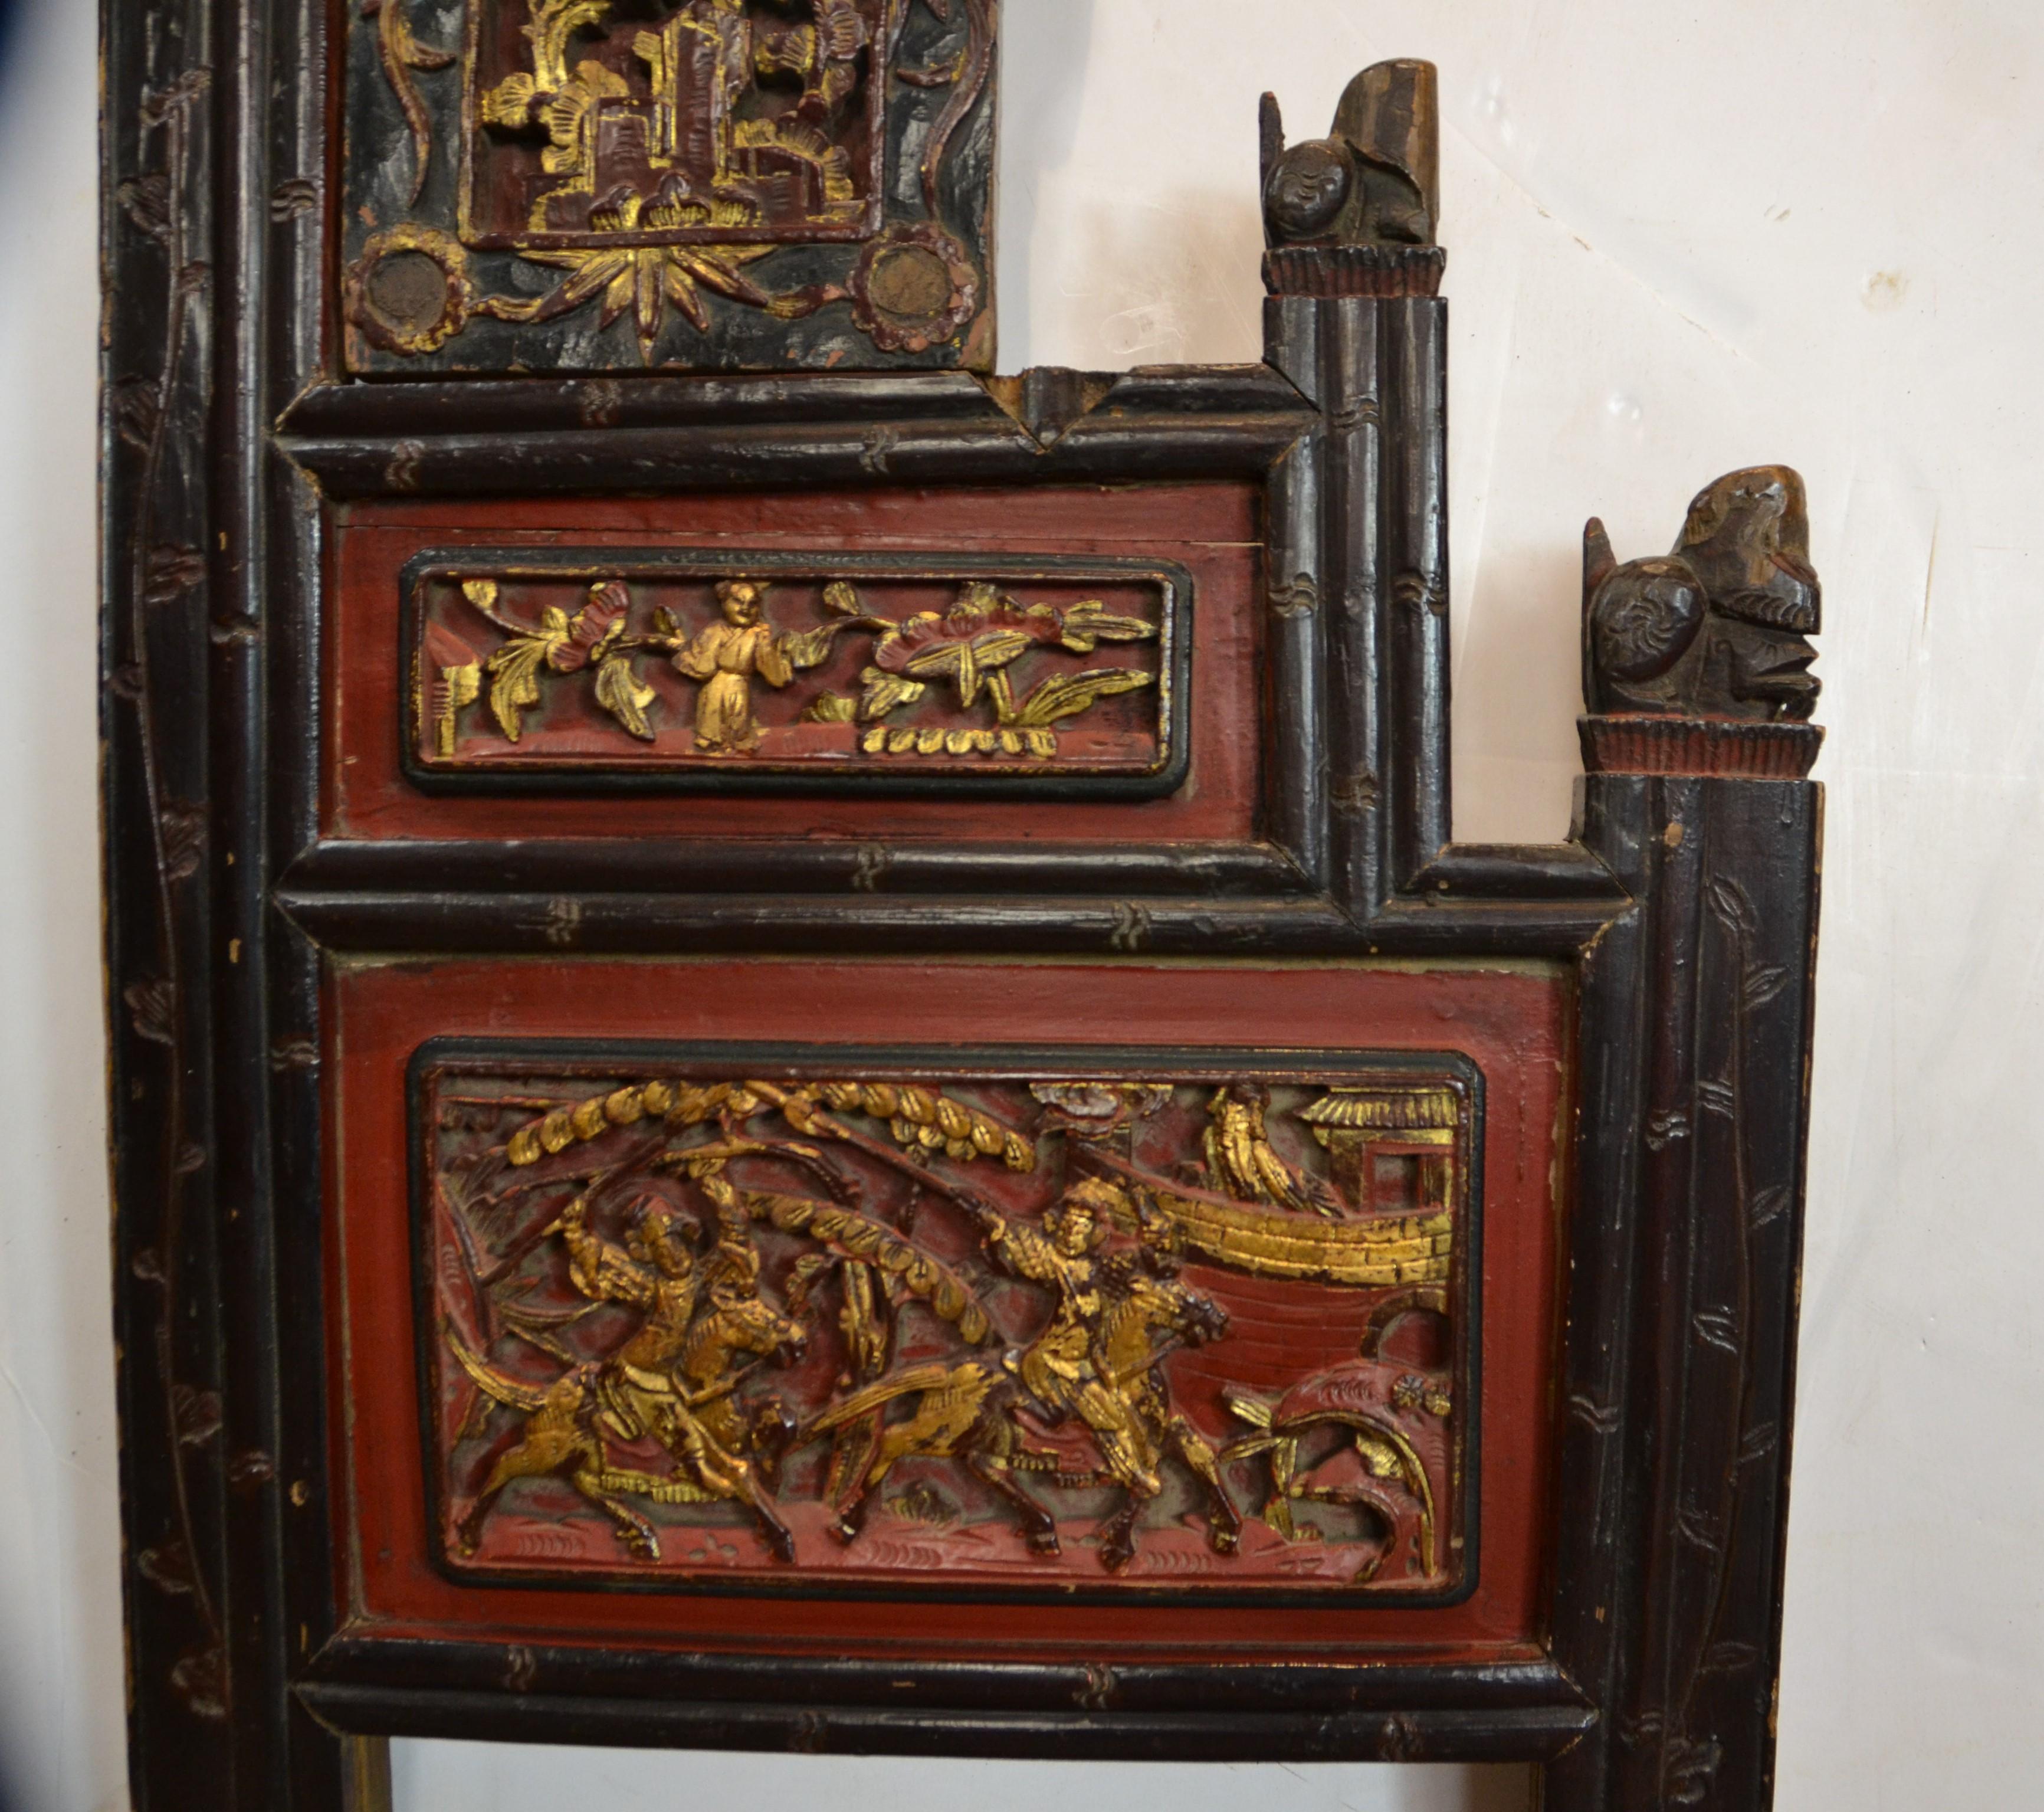 Hand carved Chines wood panel. This item is part of a bed turned in to a panel.